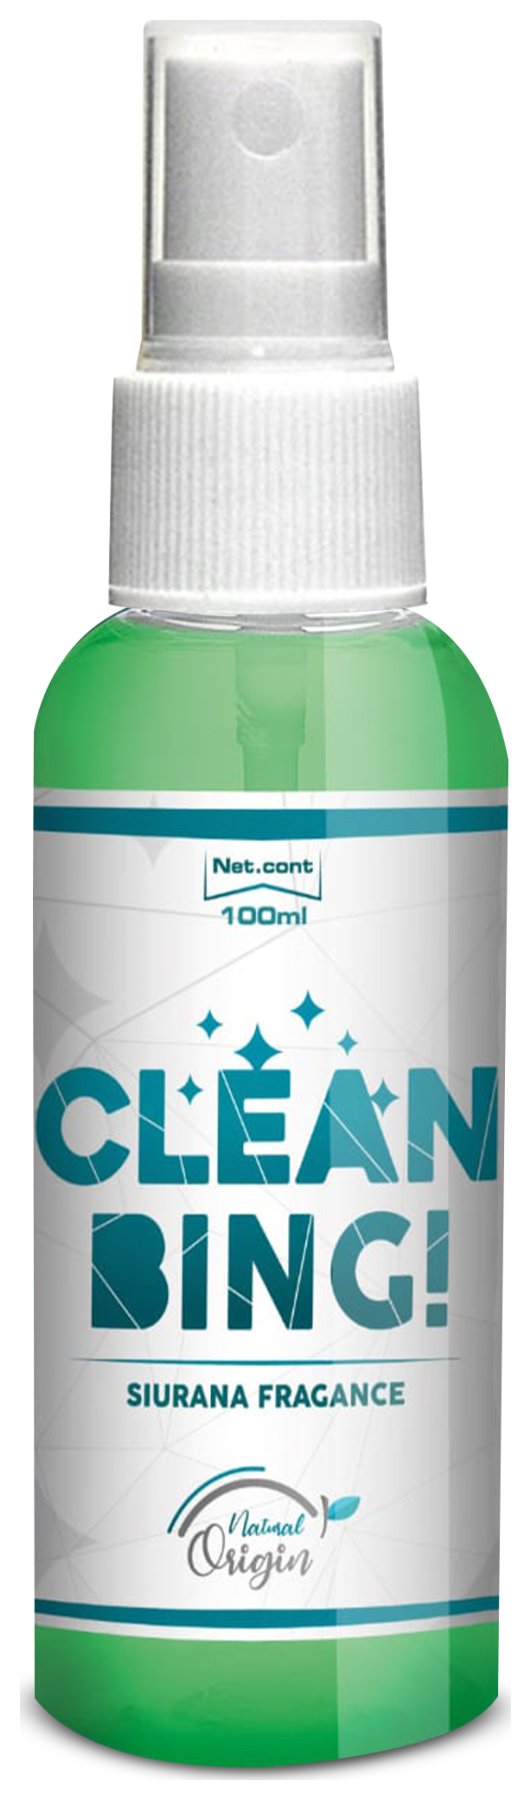 Cleanbing! Shoes (100ML), scented shoe deodorizer